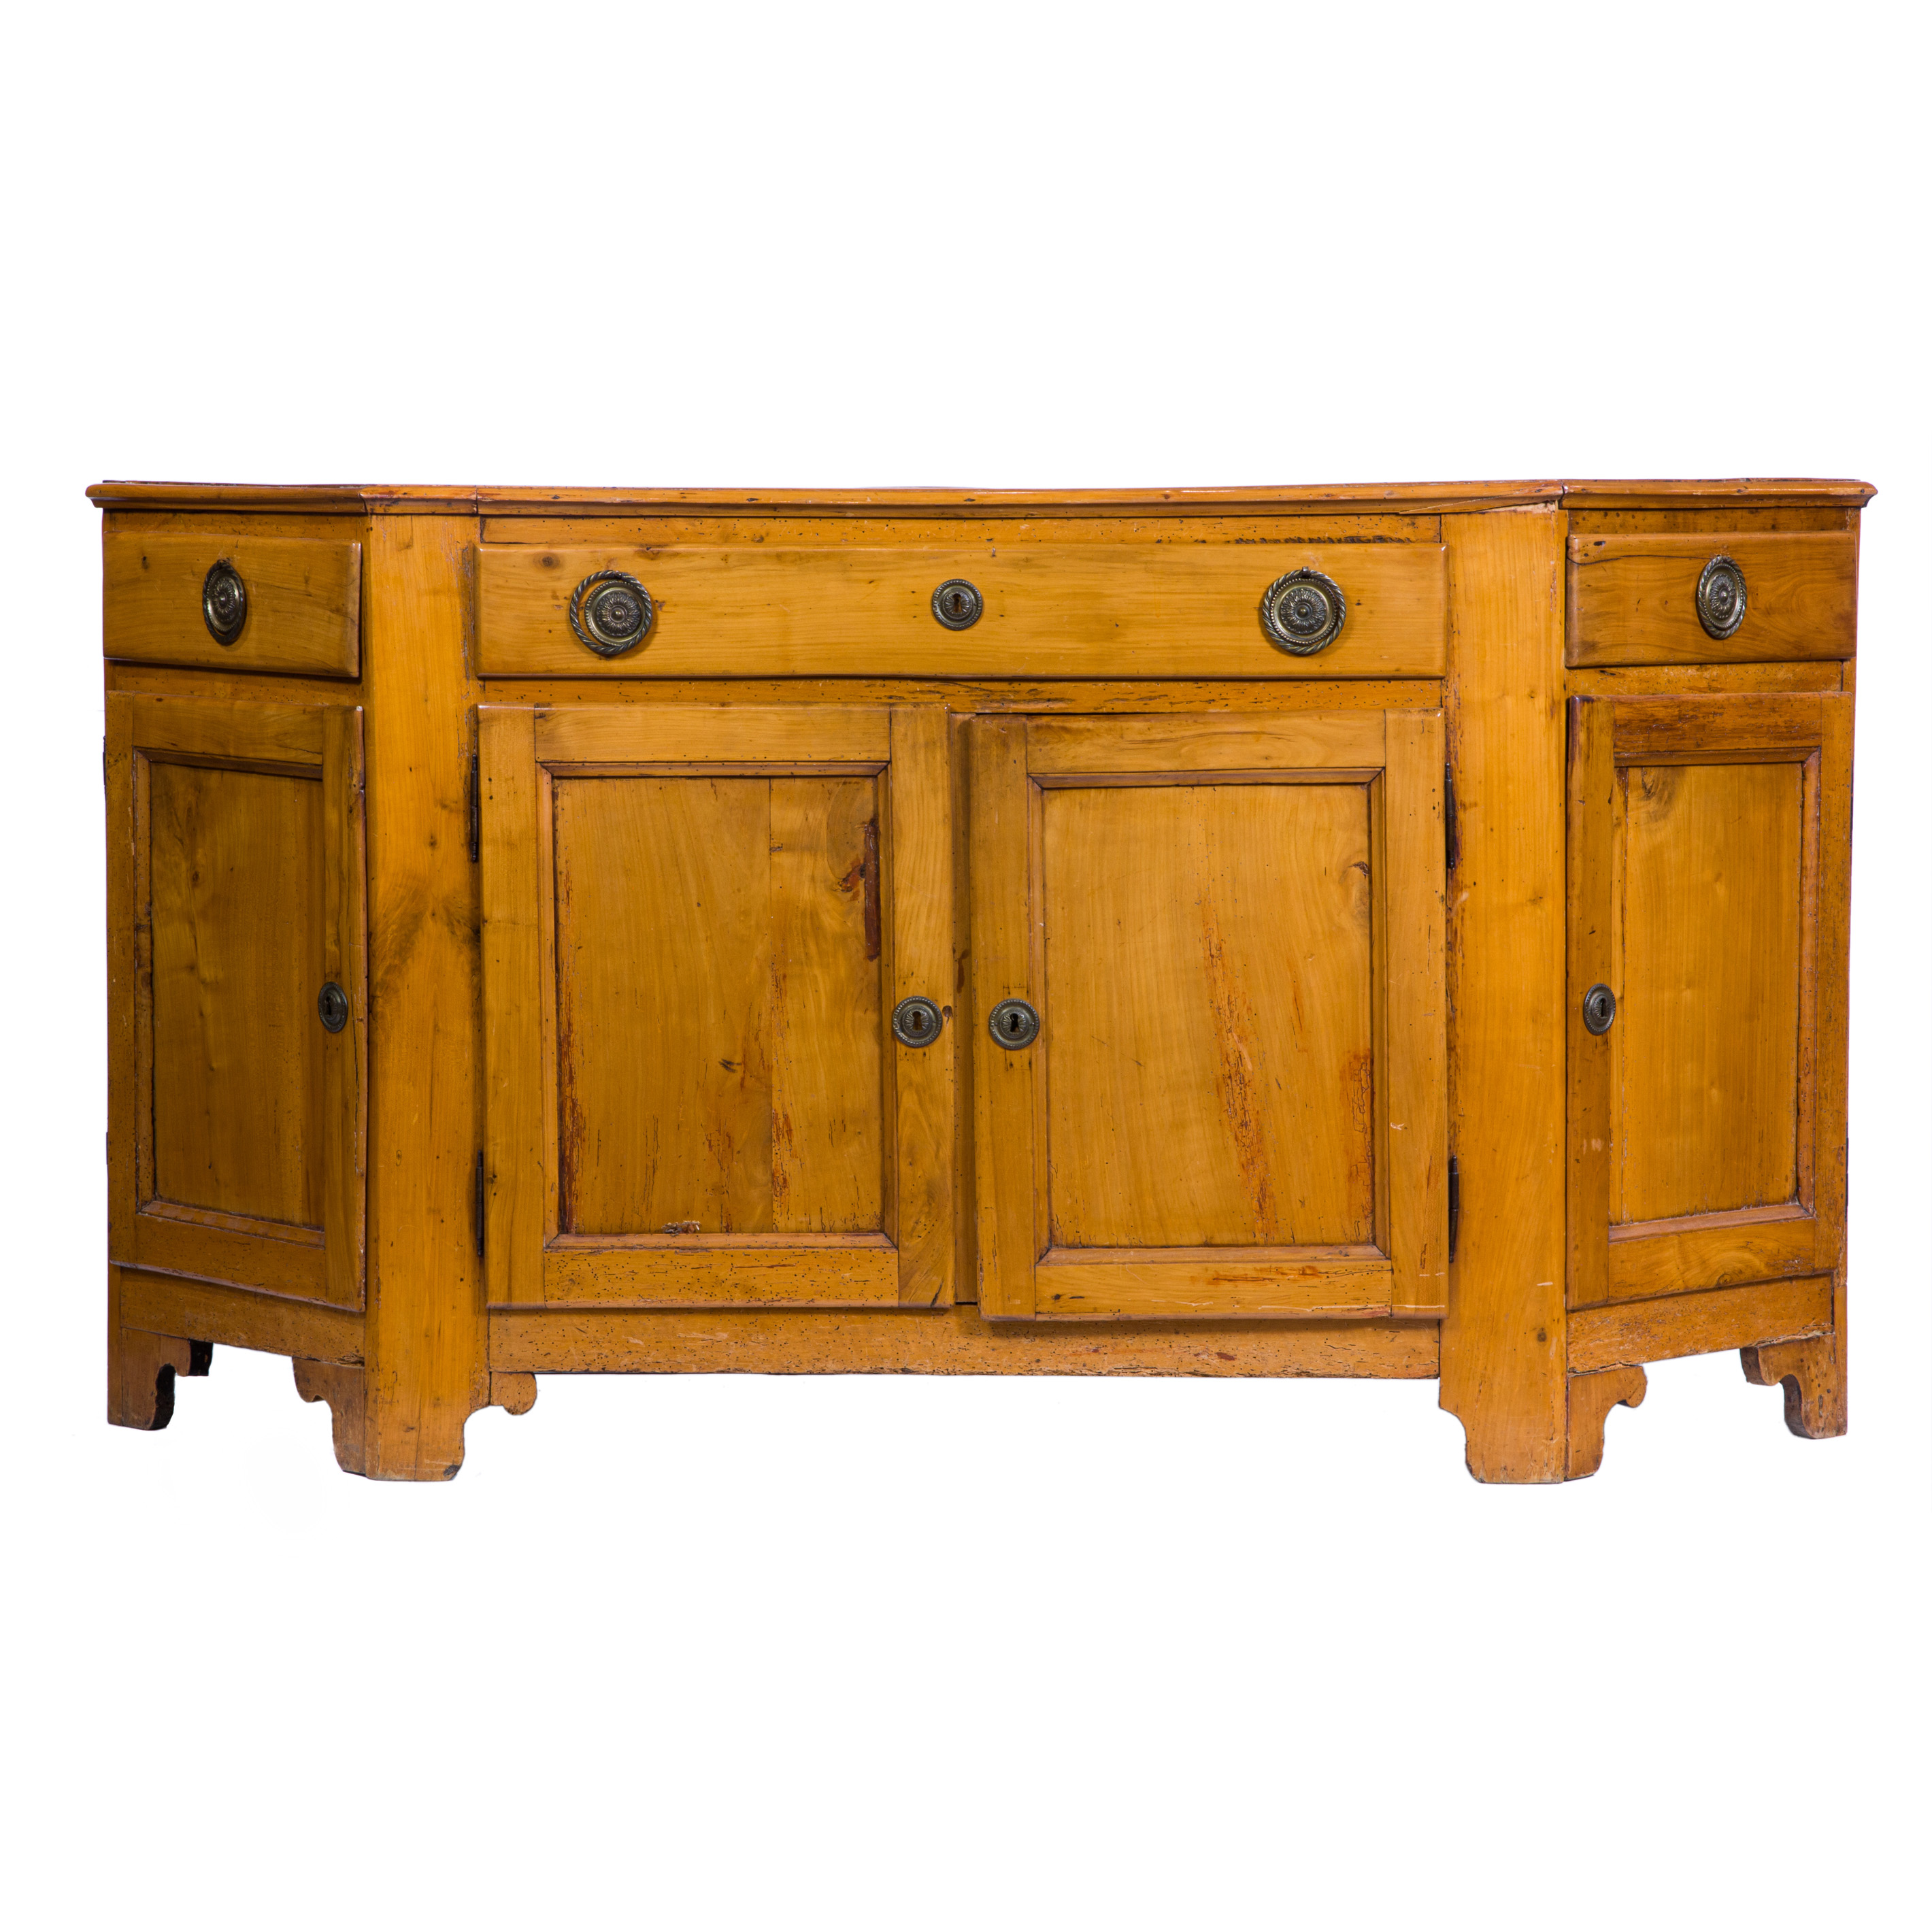 A FRENCH PROVINCIAL PINE BUFFET